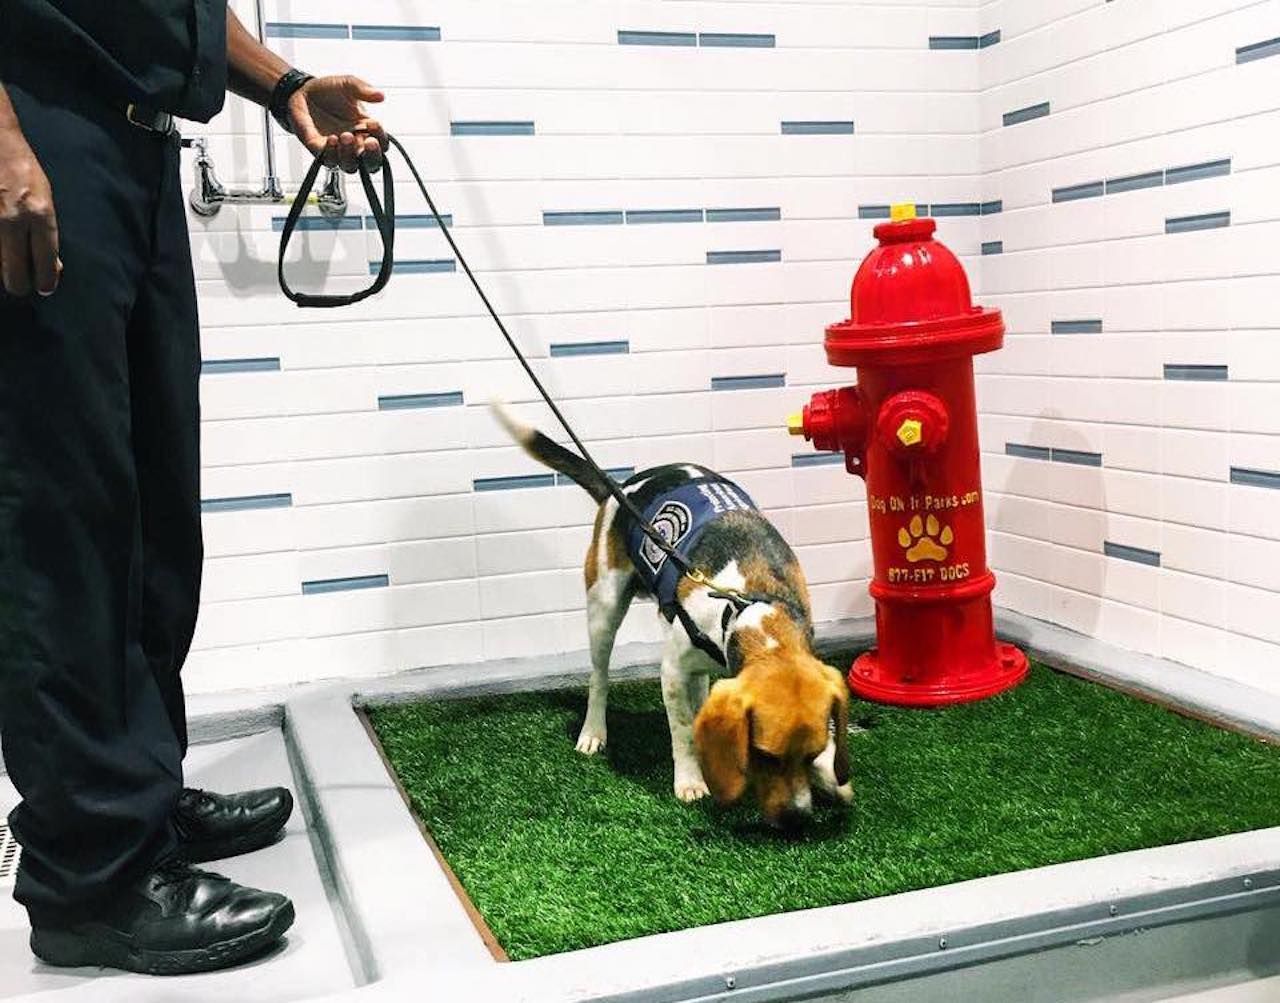 Dog sniffing fire hydrant